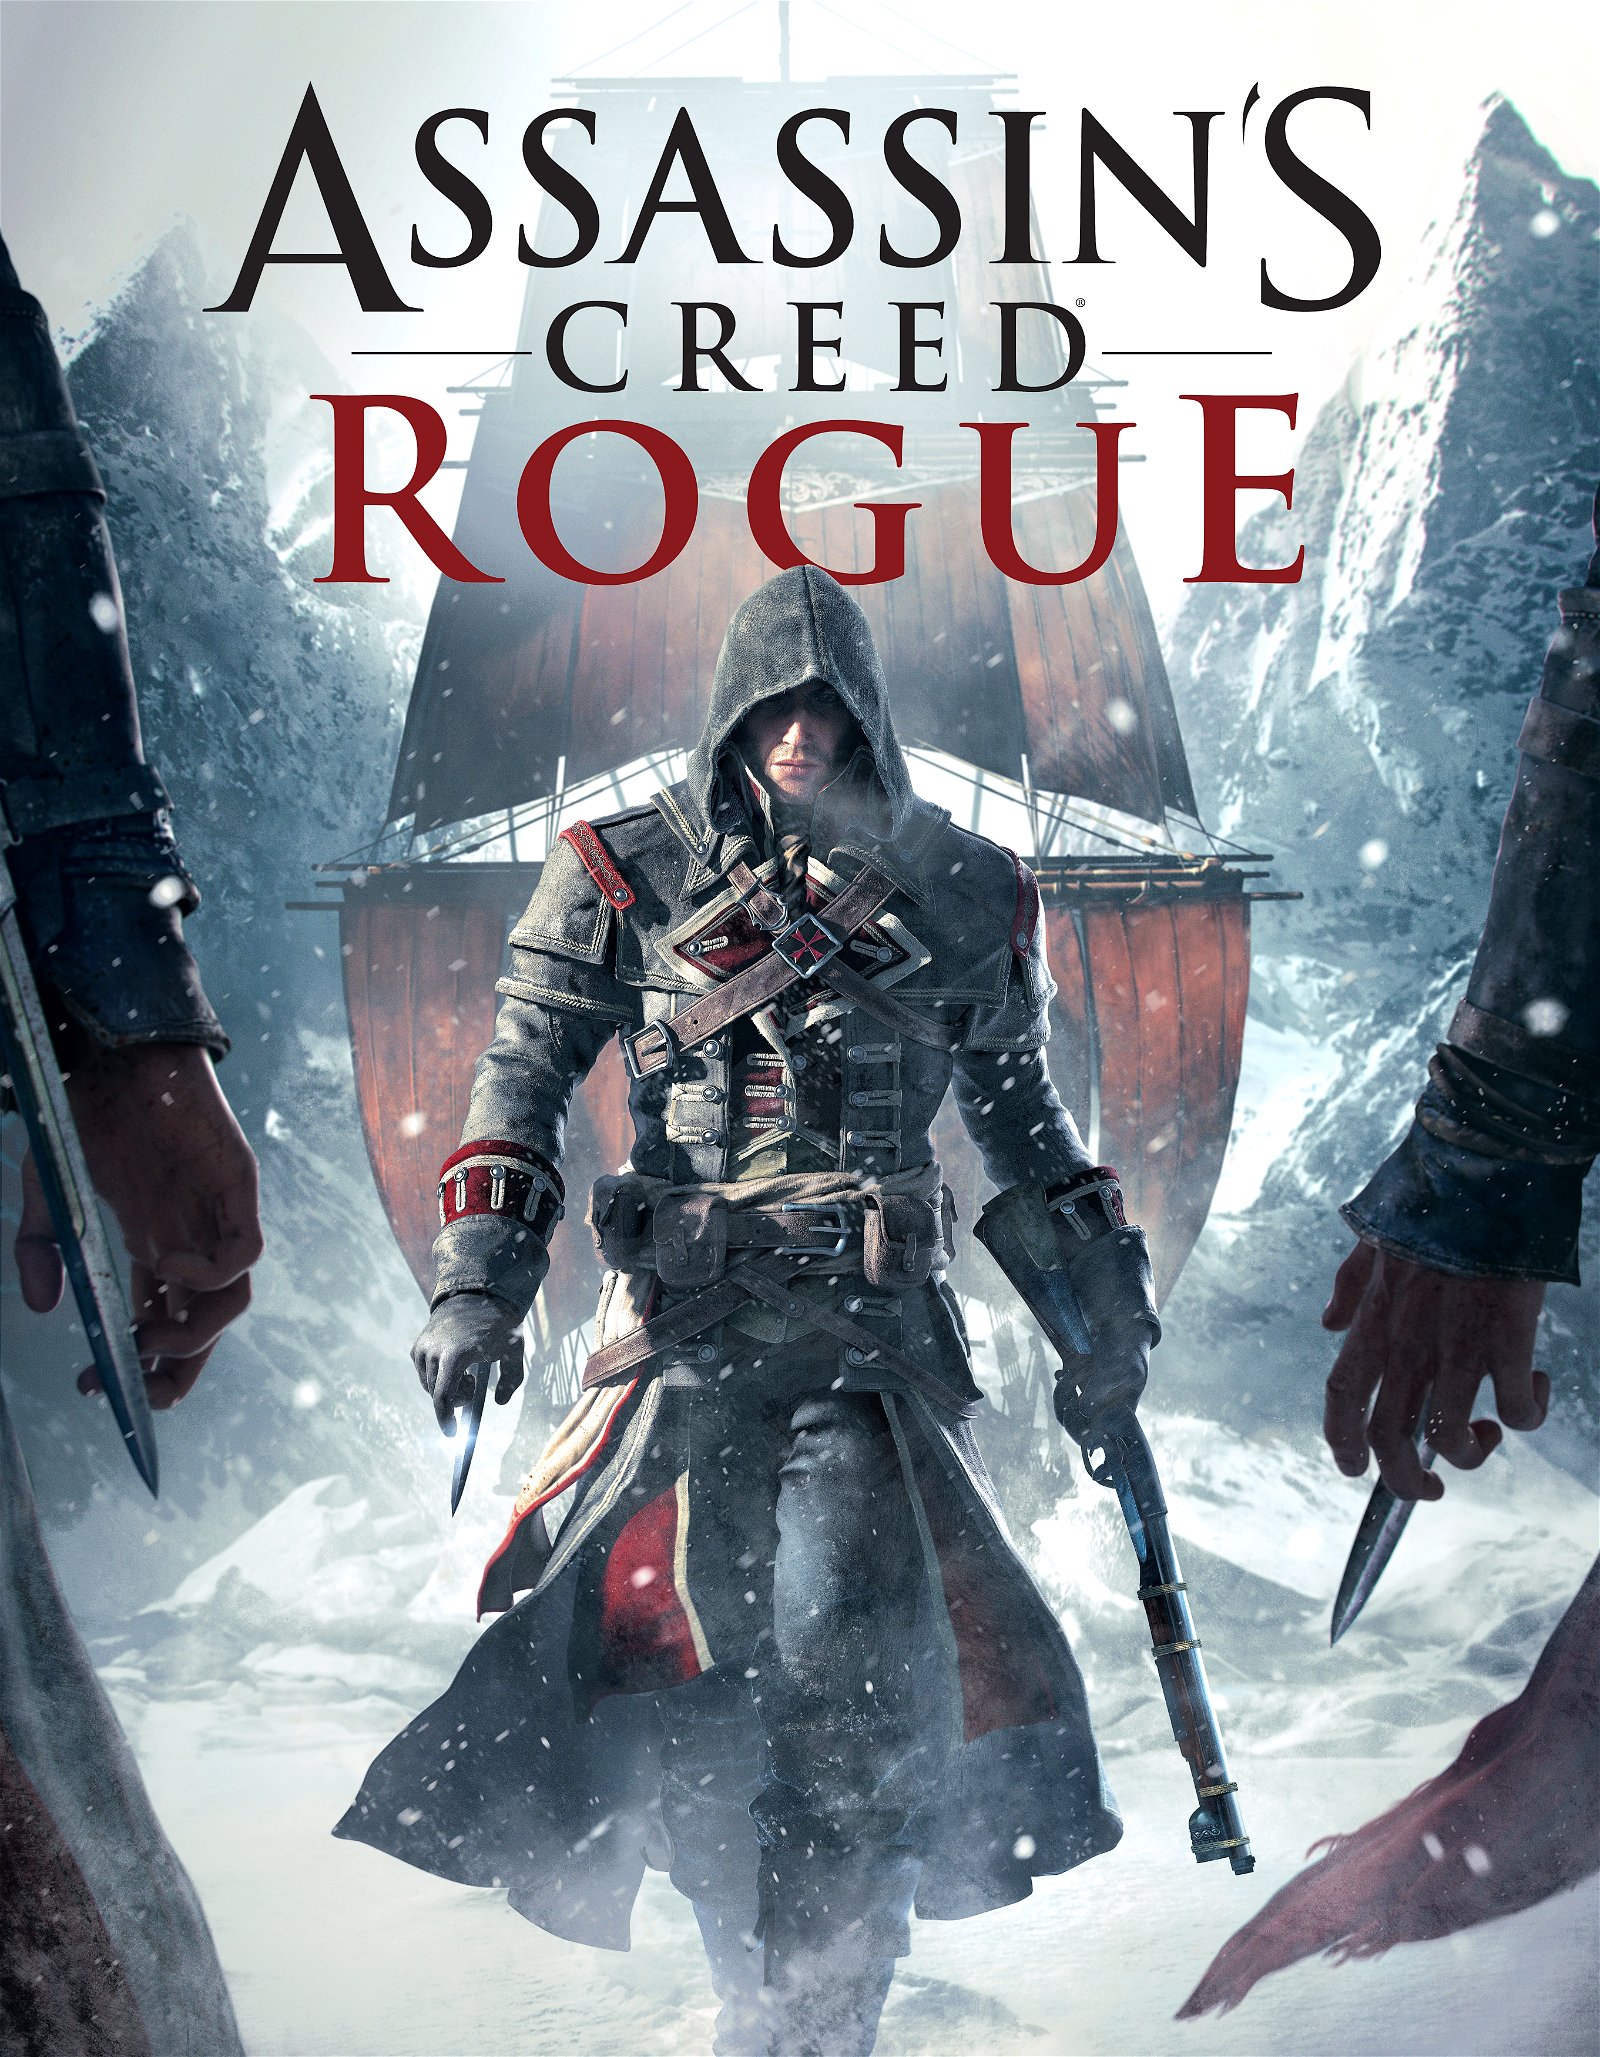 Image of Assassin's Creed: Rogue